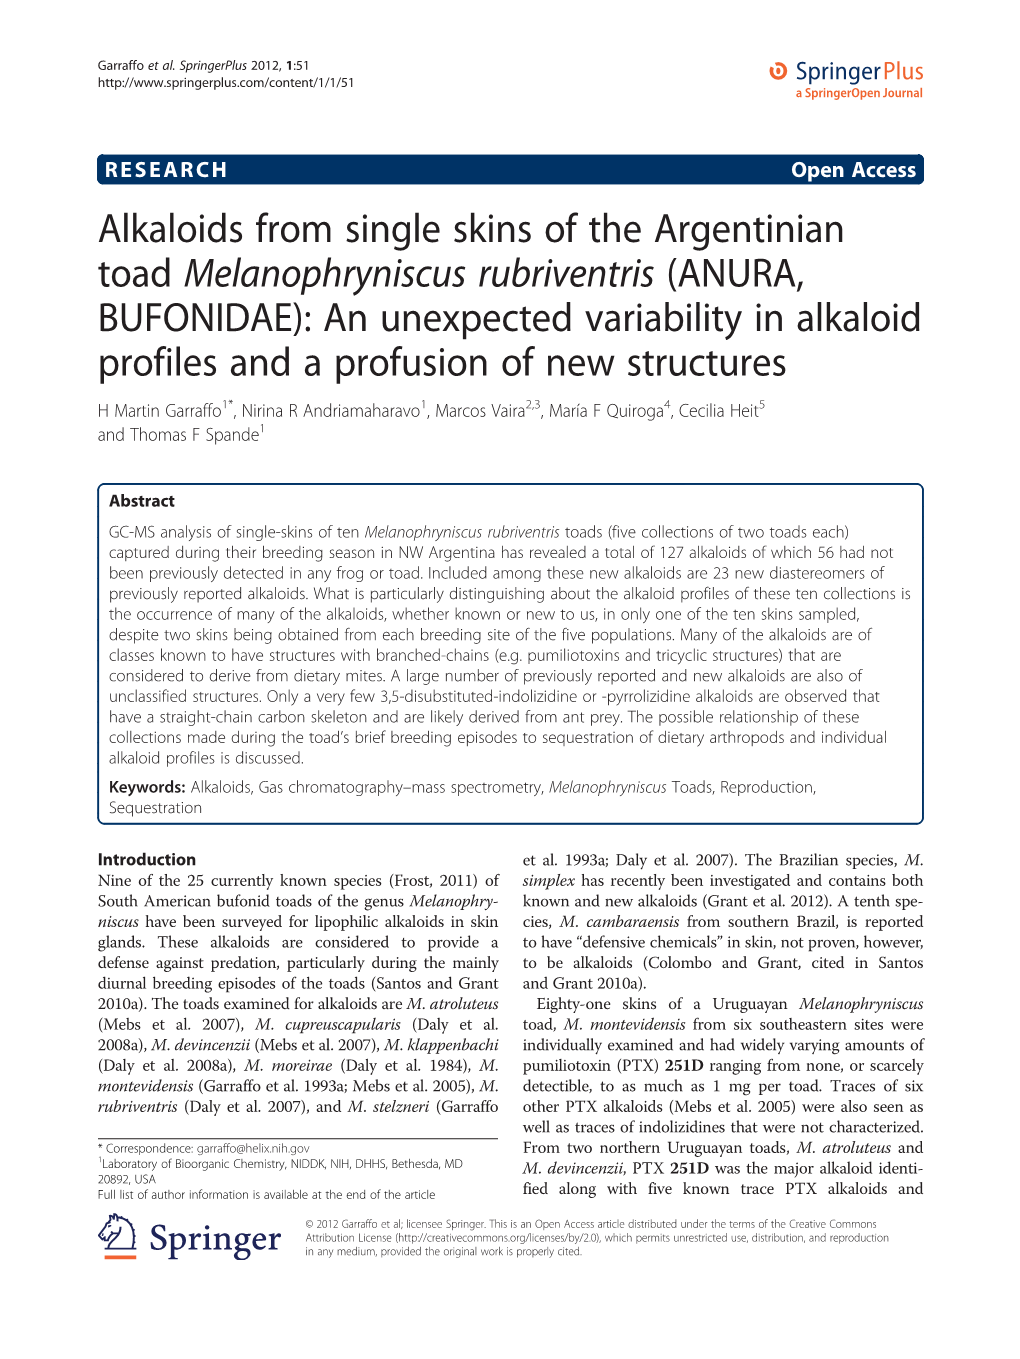 Alkaloids from Single Skins of the Argentinian Toad Melanophryniscus Rubriventris (ANURA, BUFONIDAE): an Unexpected Variability